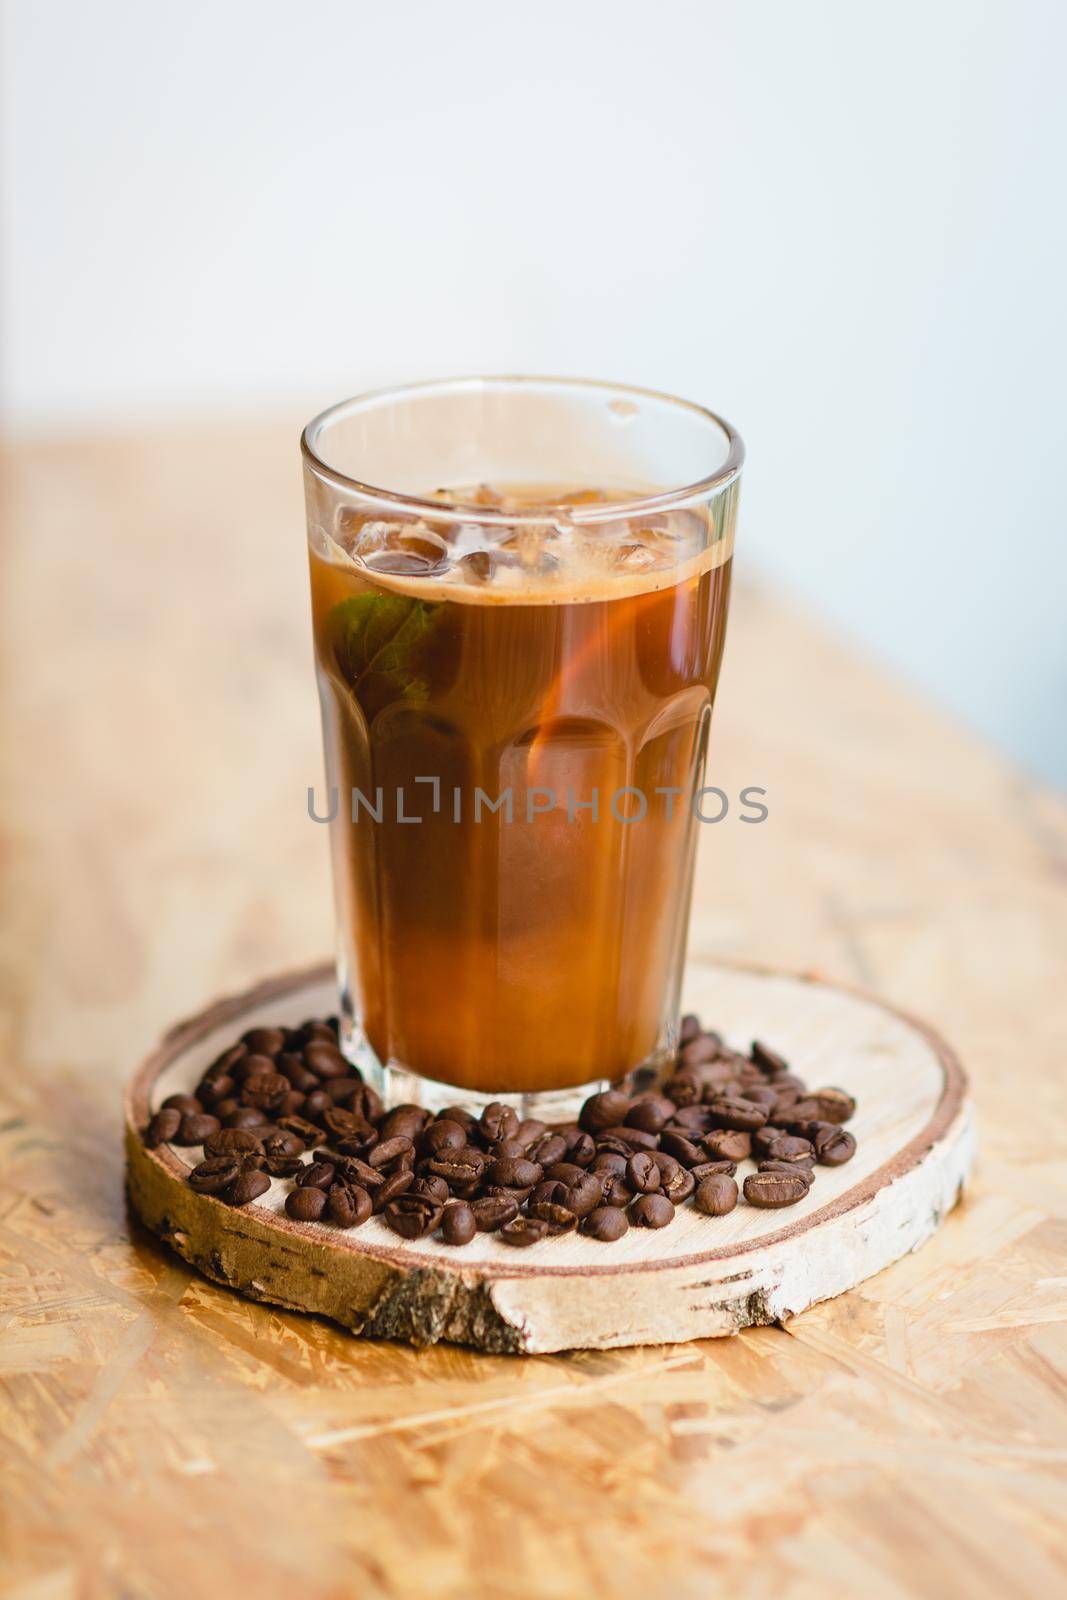 Iced coffee or caffe latte in takeaway cup including clipping path